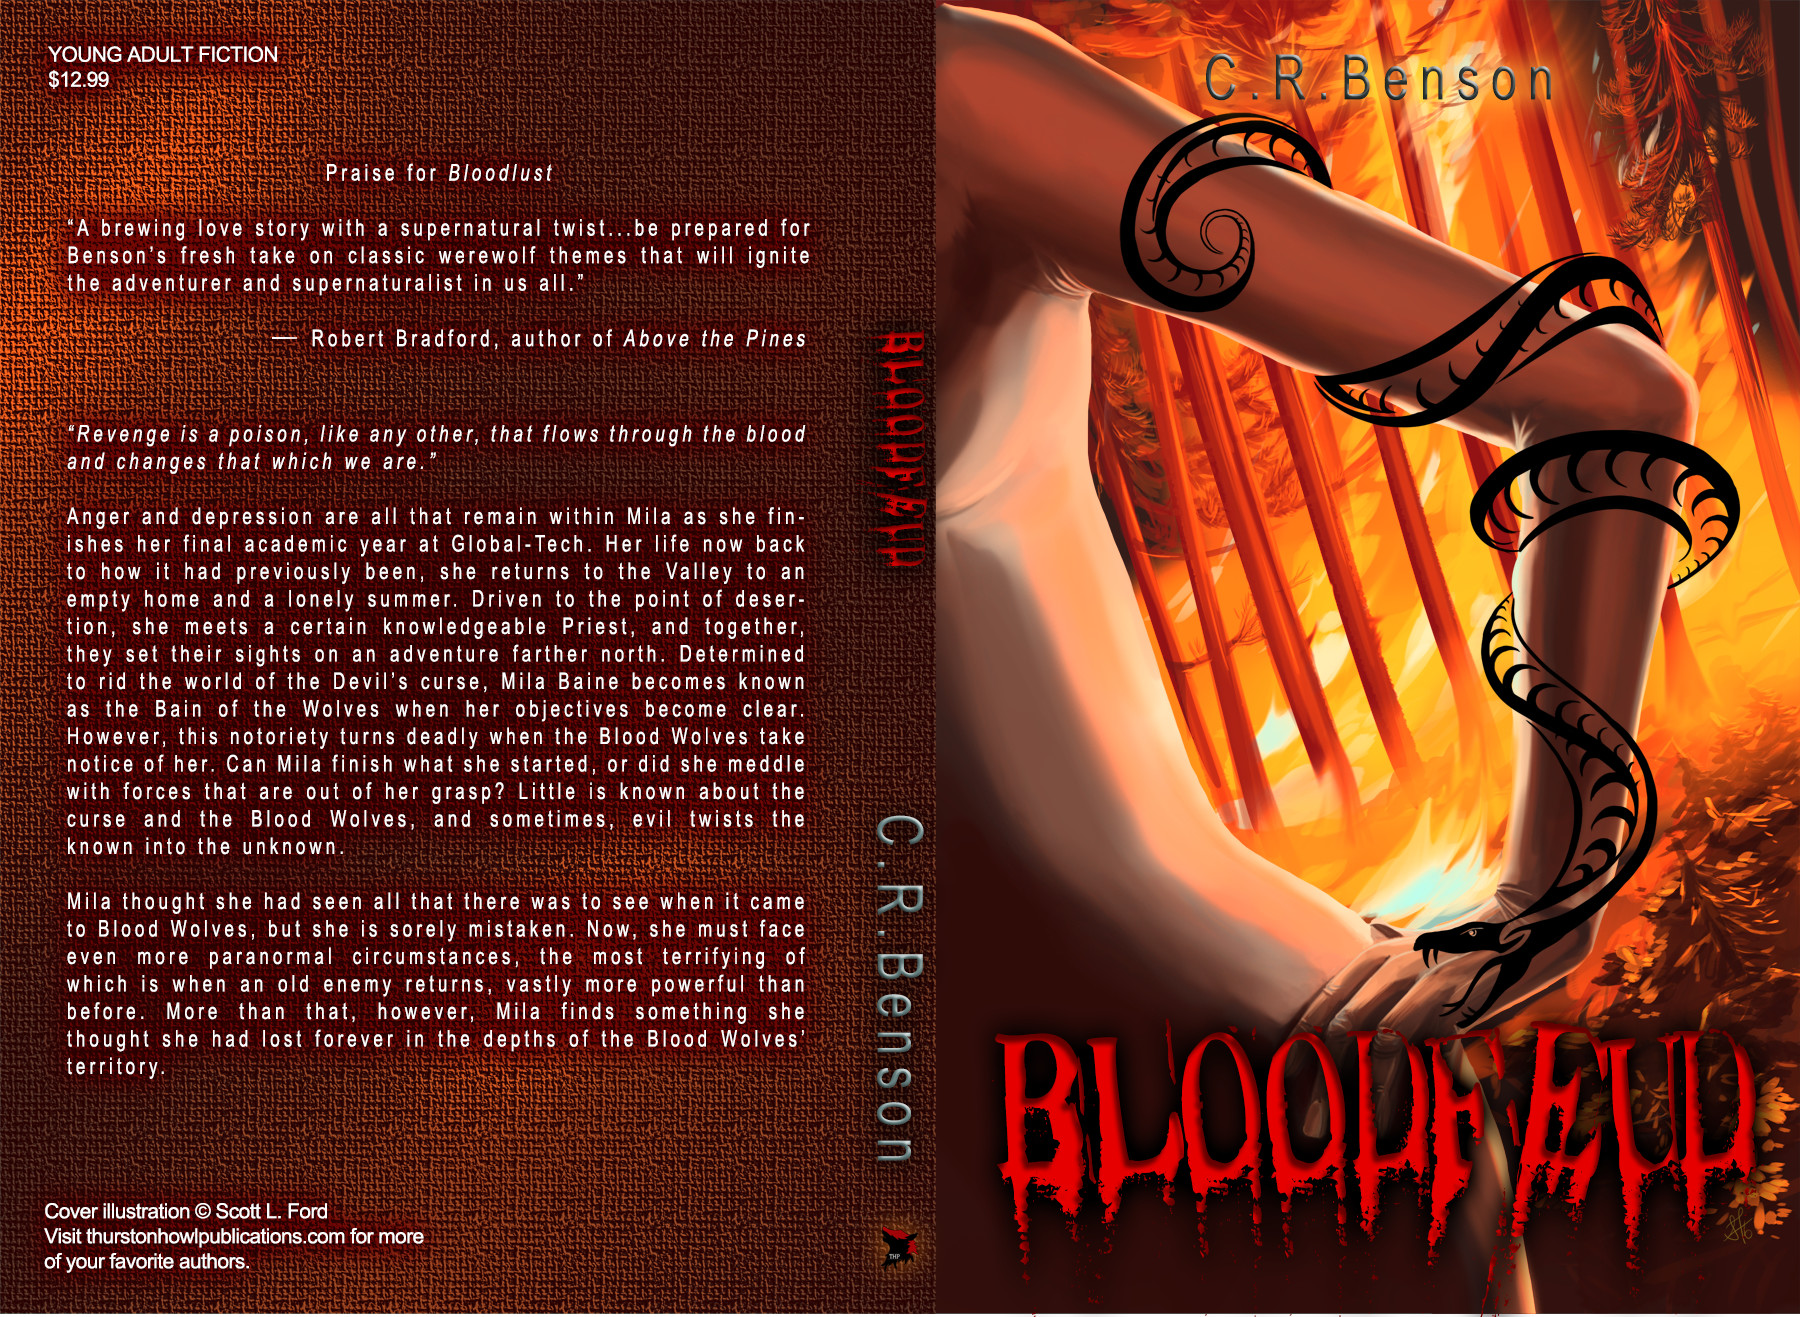 Cover for Bloodfeud by C. R. Benson